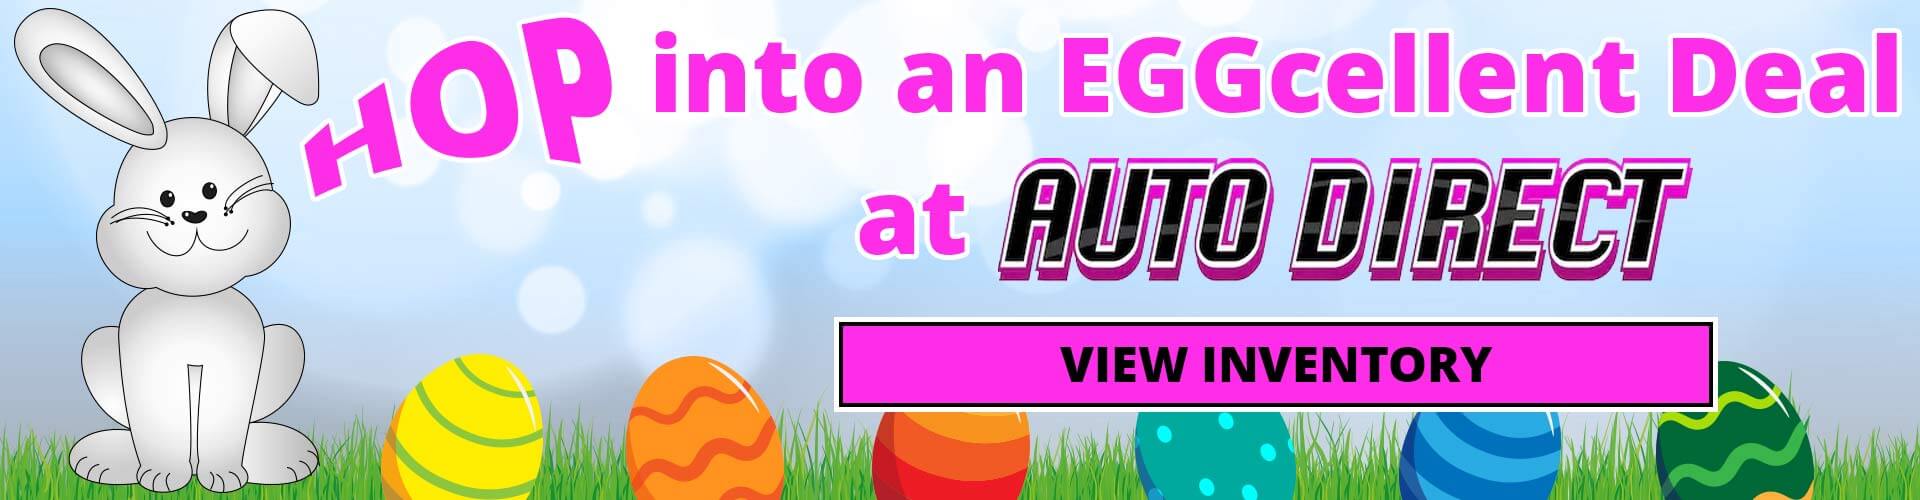 View Inventory - Easter